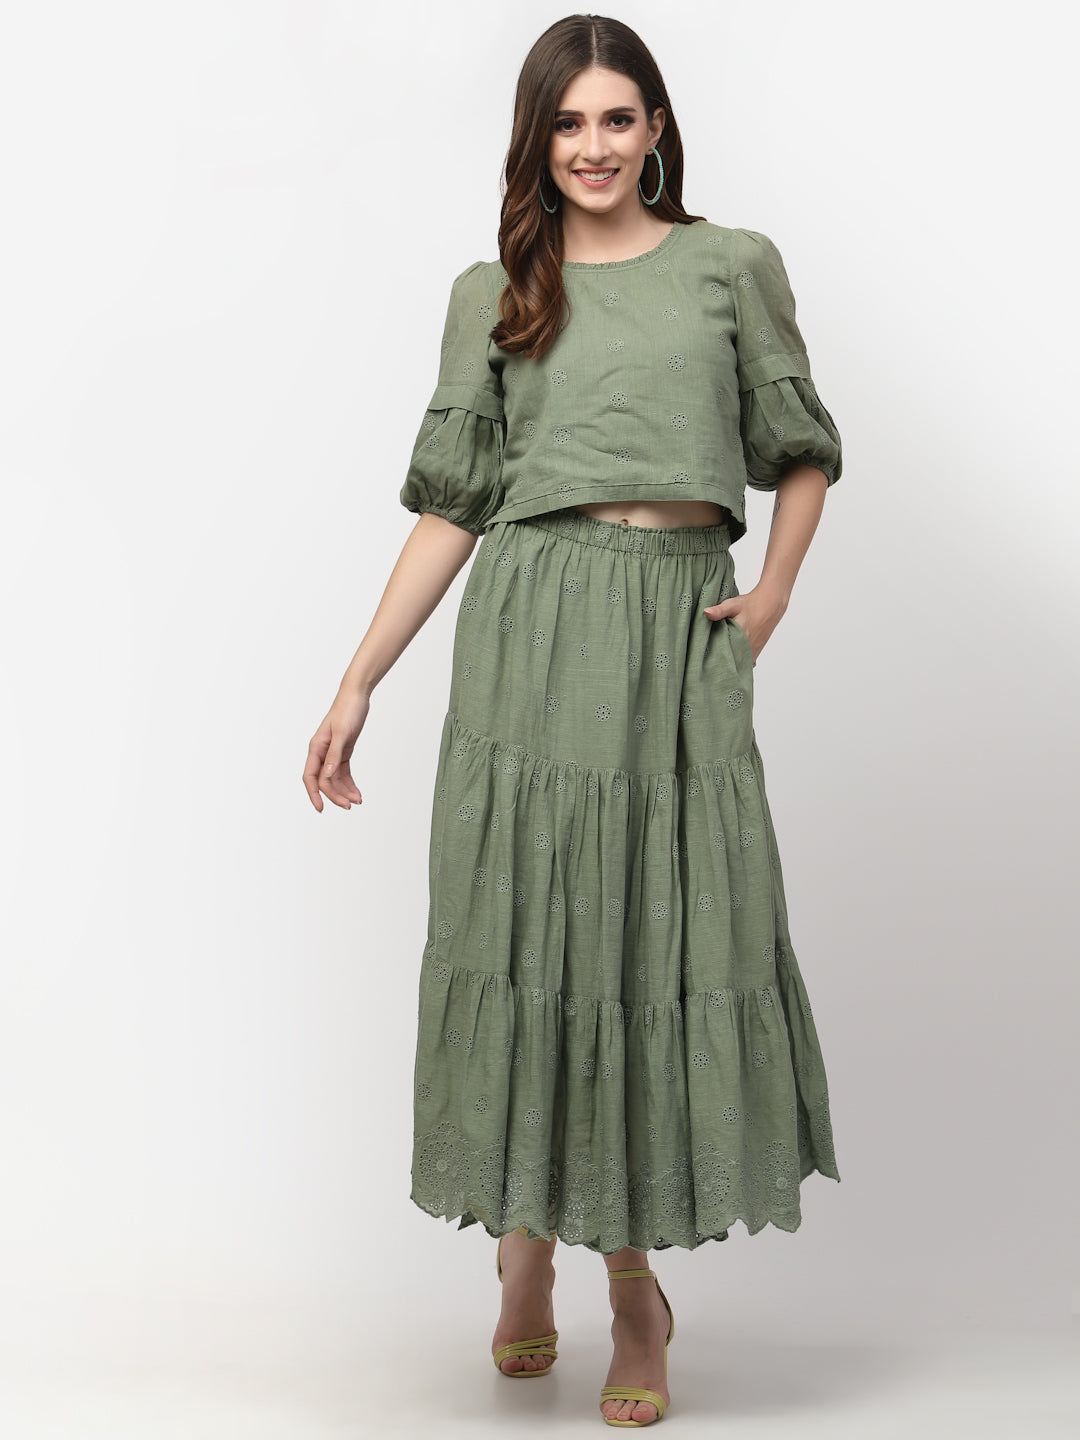 Terquois Self-Design Casual Skirt-Top with gathers and Pleates Coordinate Sets TERQUOIS   